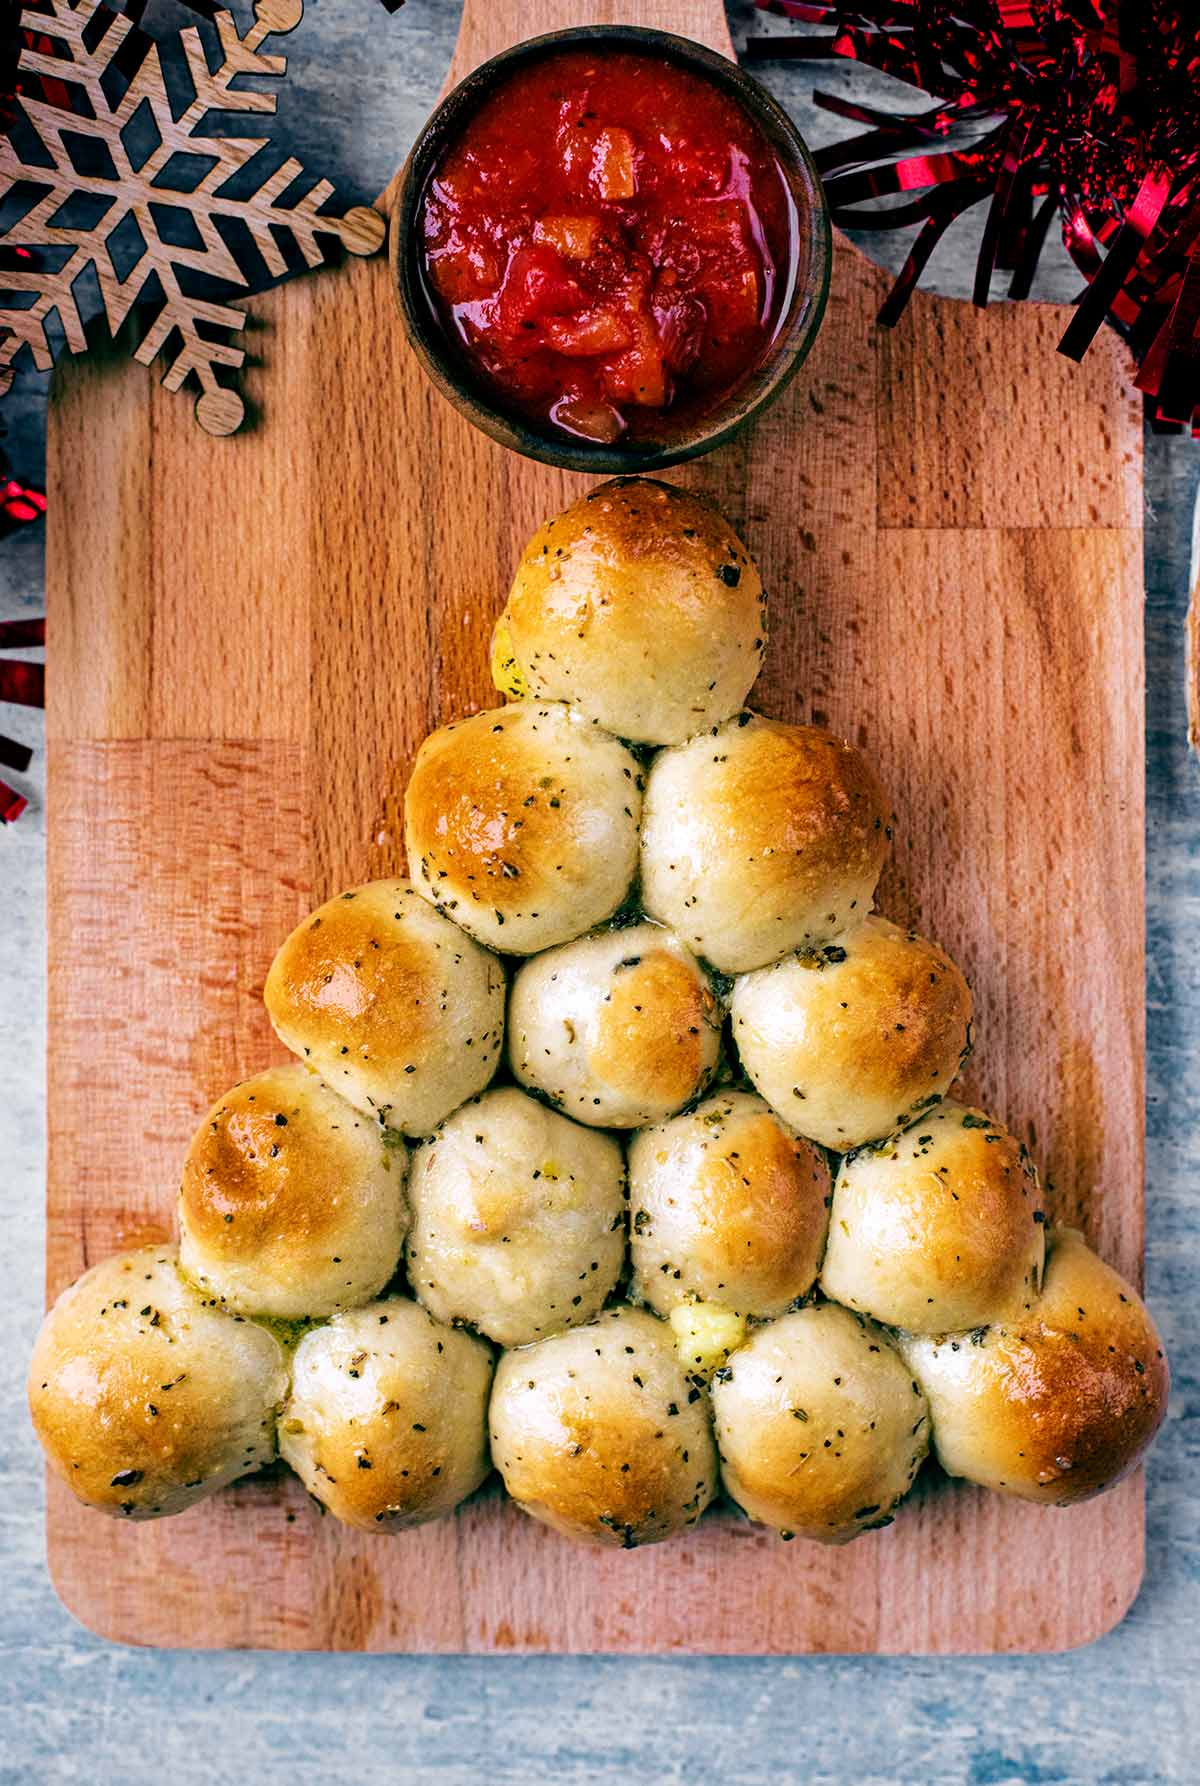 Fifteen baked dough balls in a triangle shape on a wooden board.